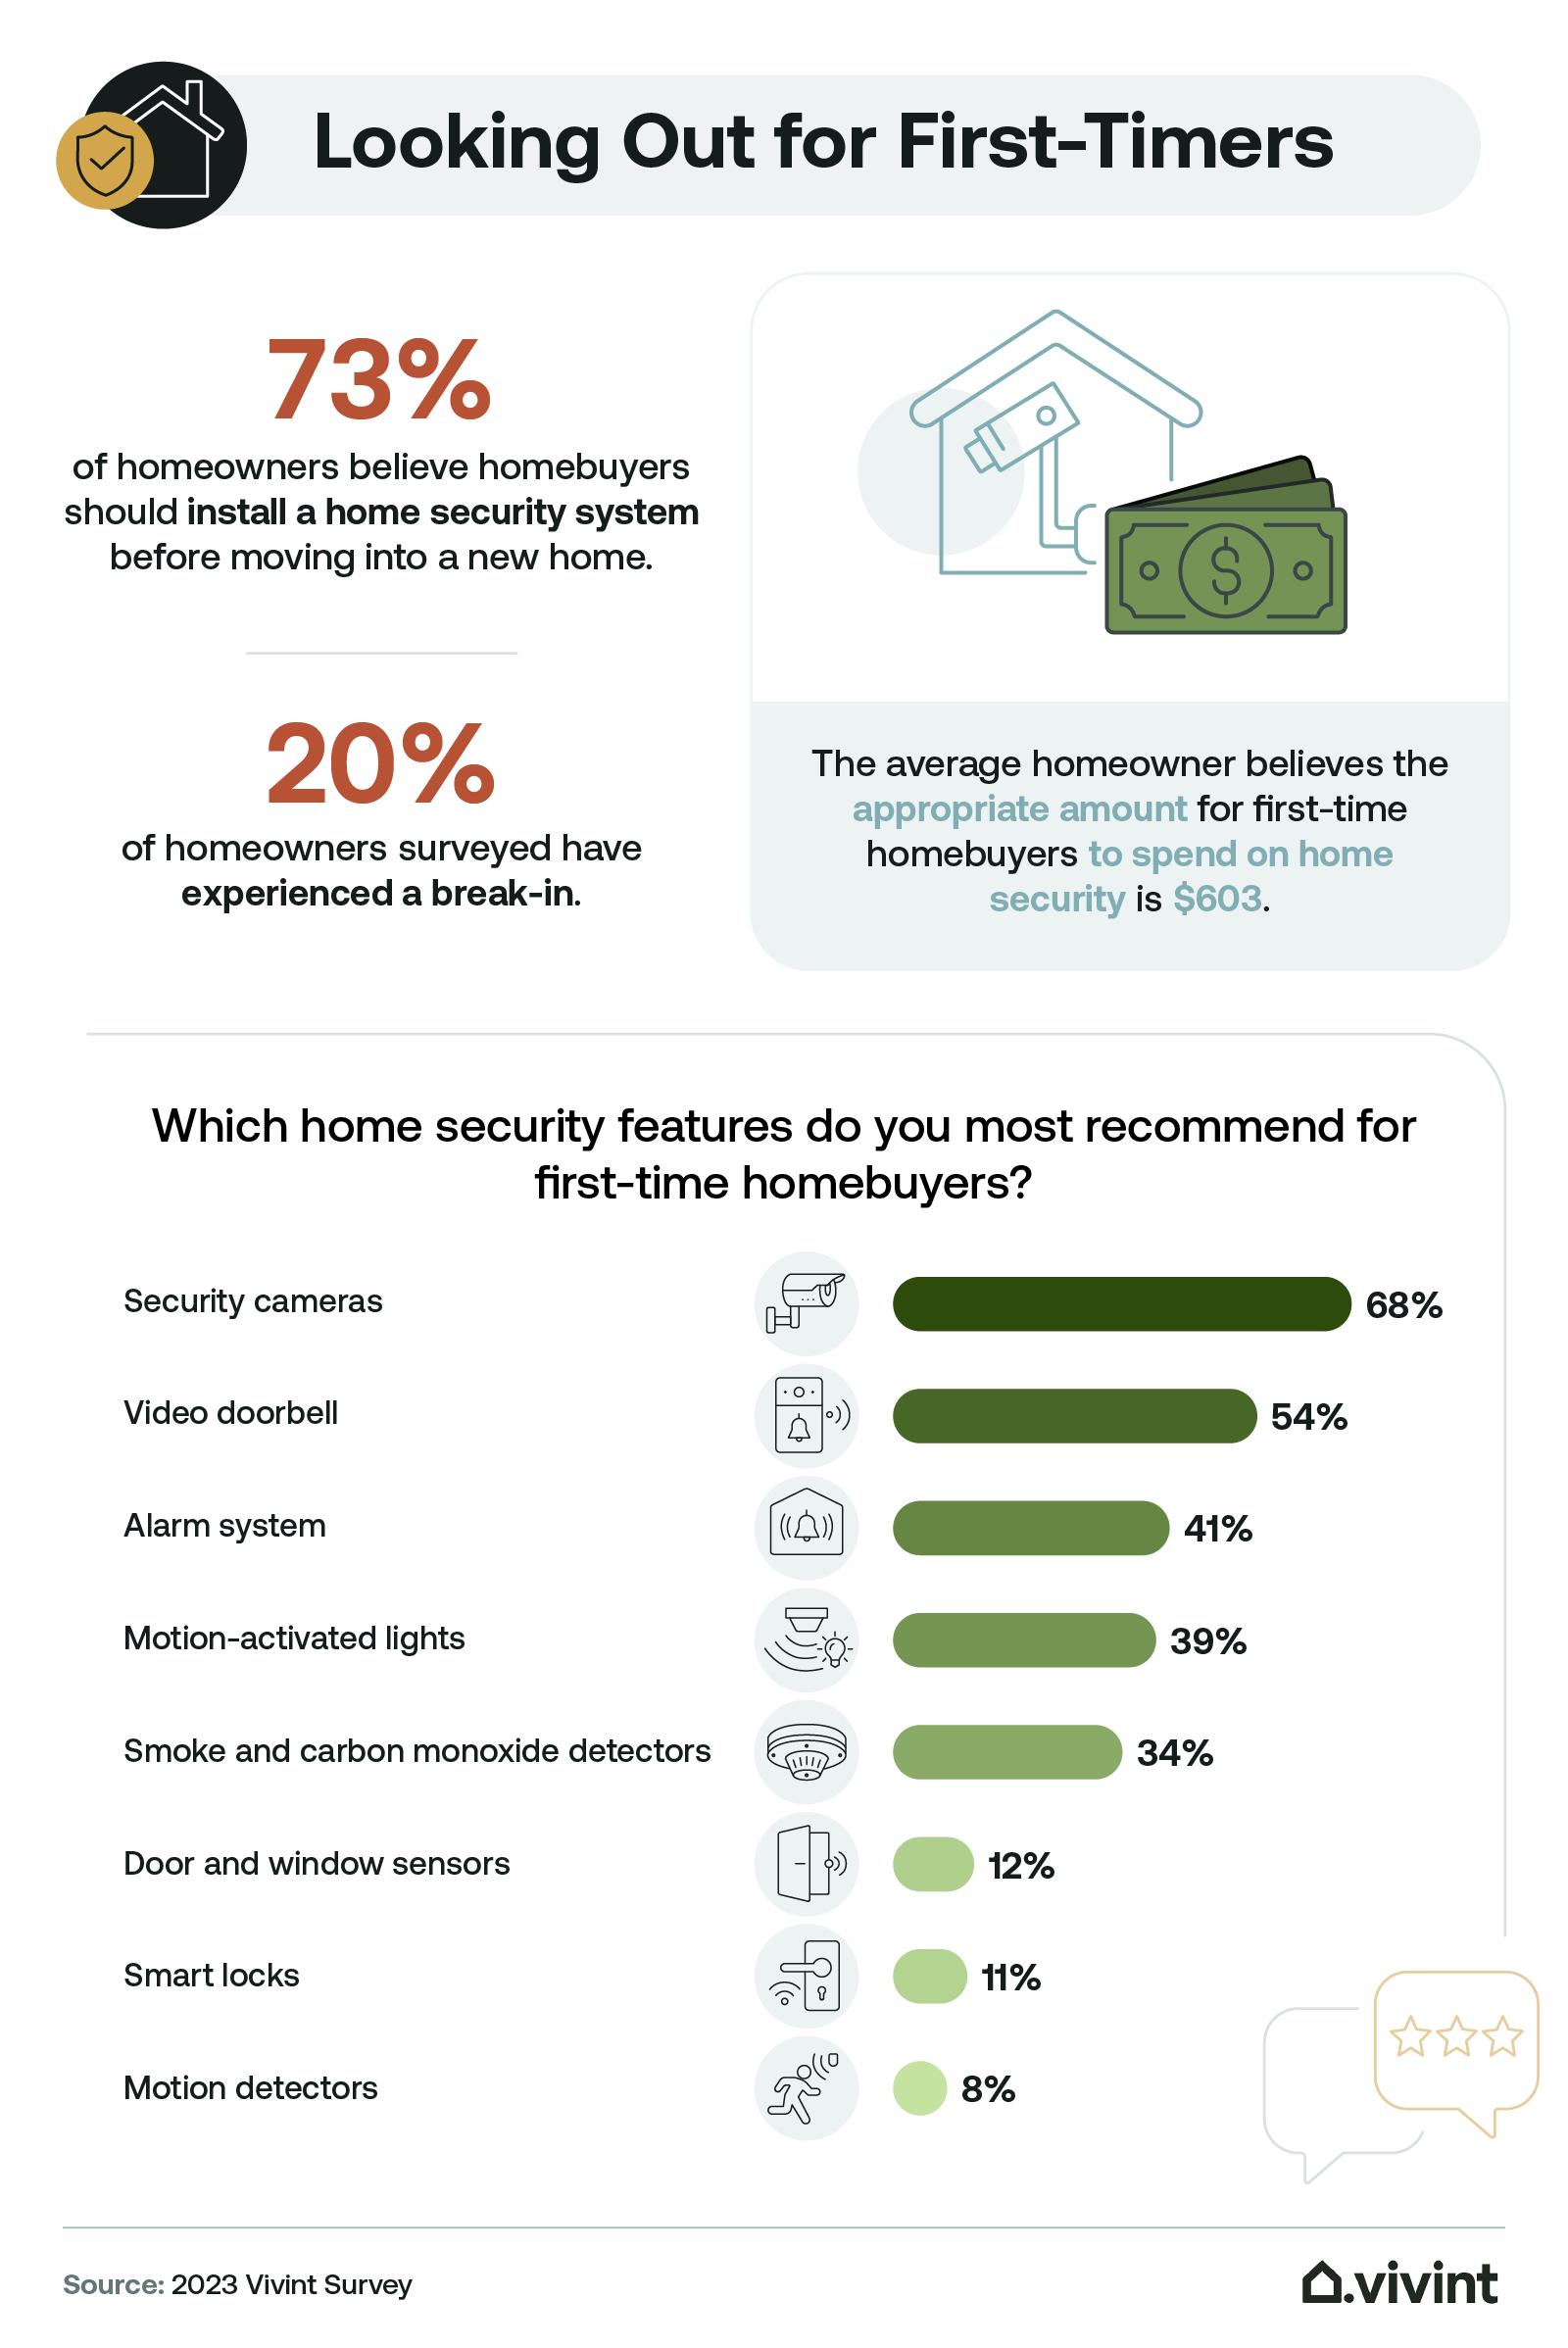 Information about what first-time homebuyers believe about home security.